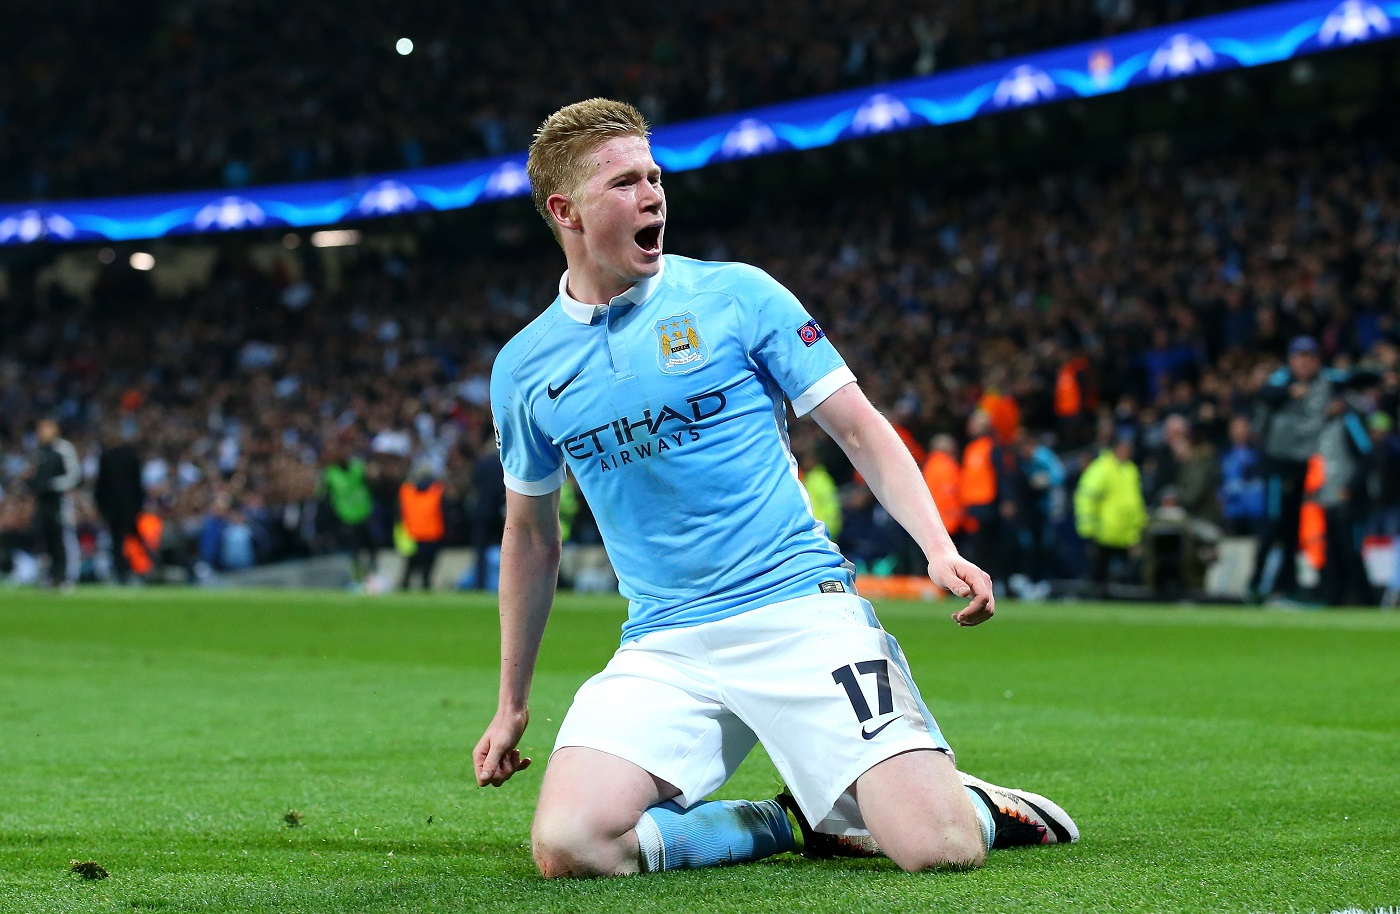 Kevin de Bruyne of Manchester City celebrates as he scores their first goal during a UEFA Champions League match